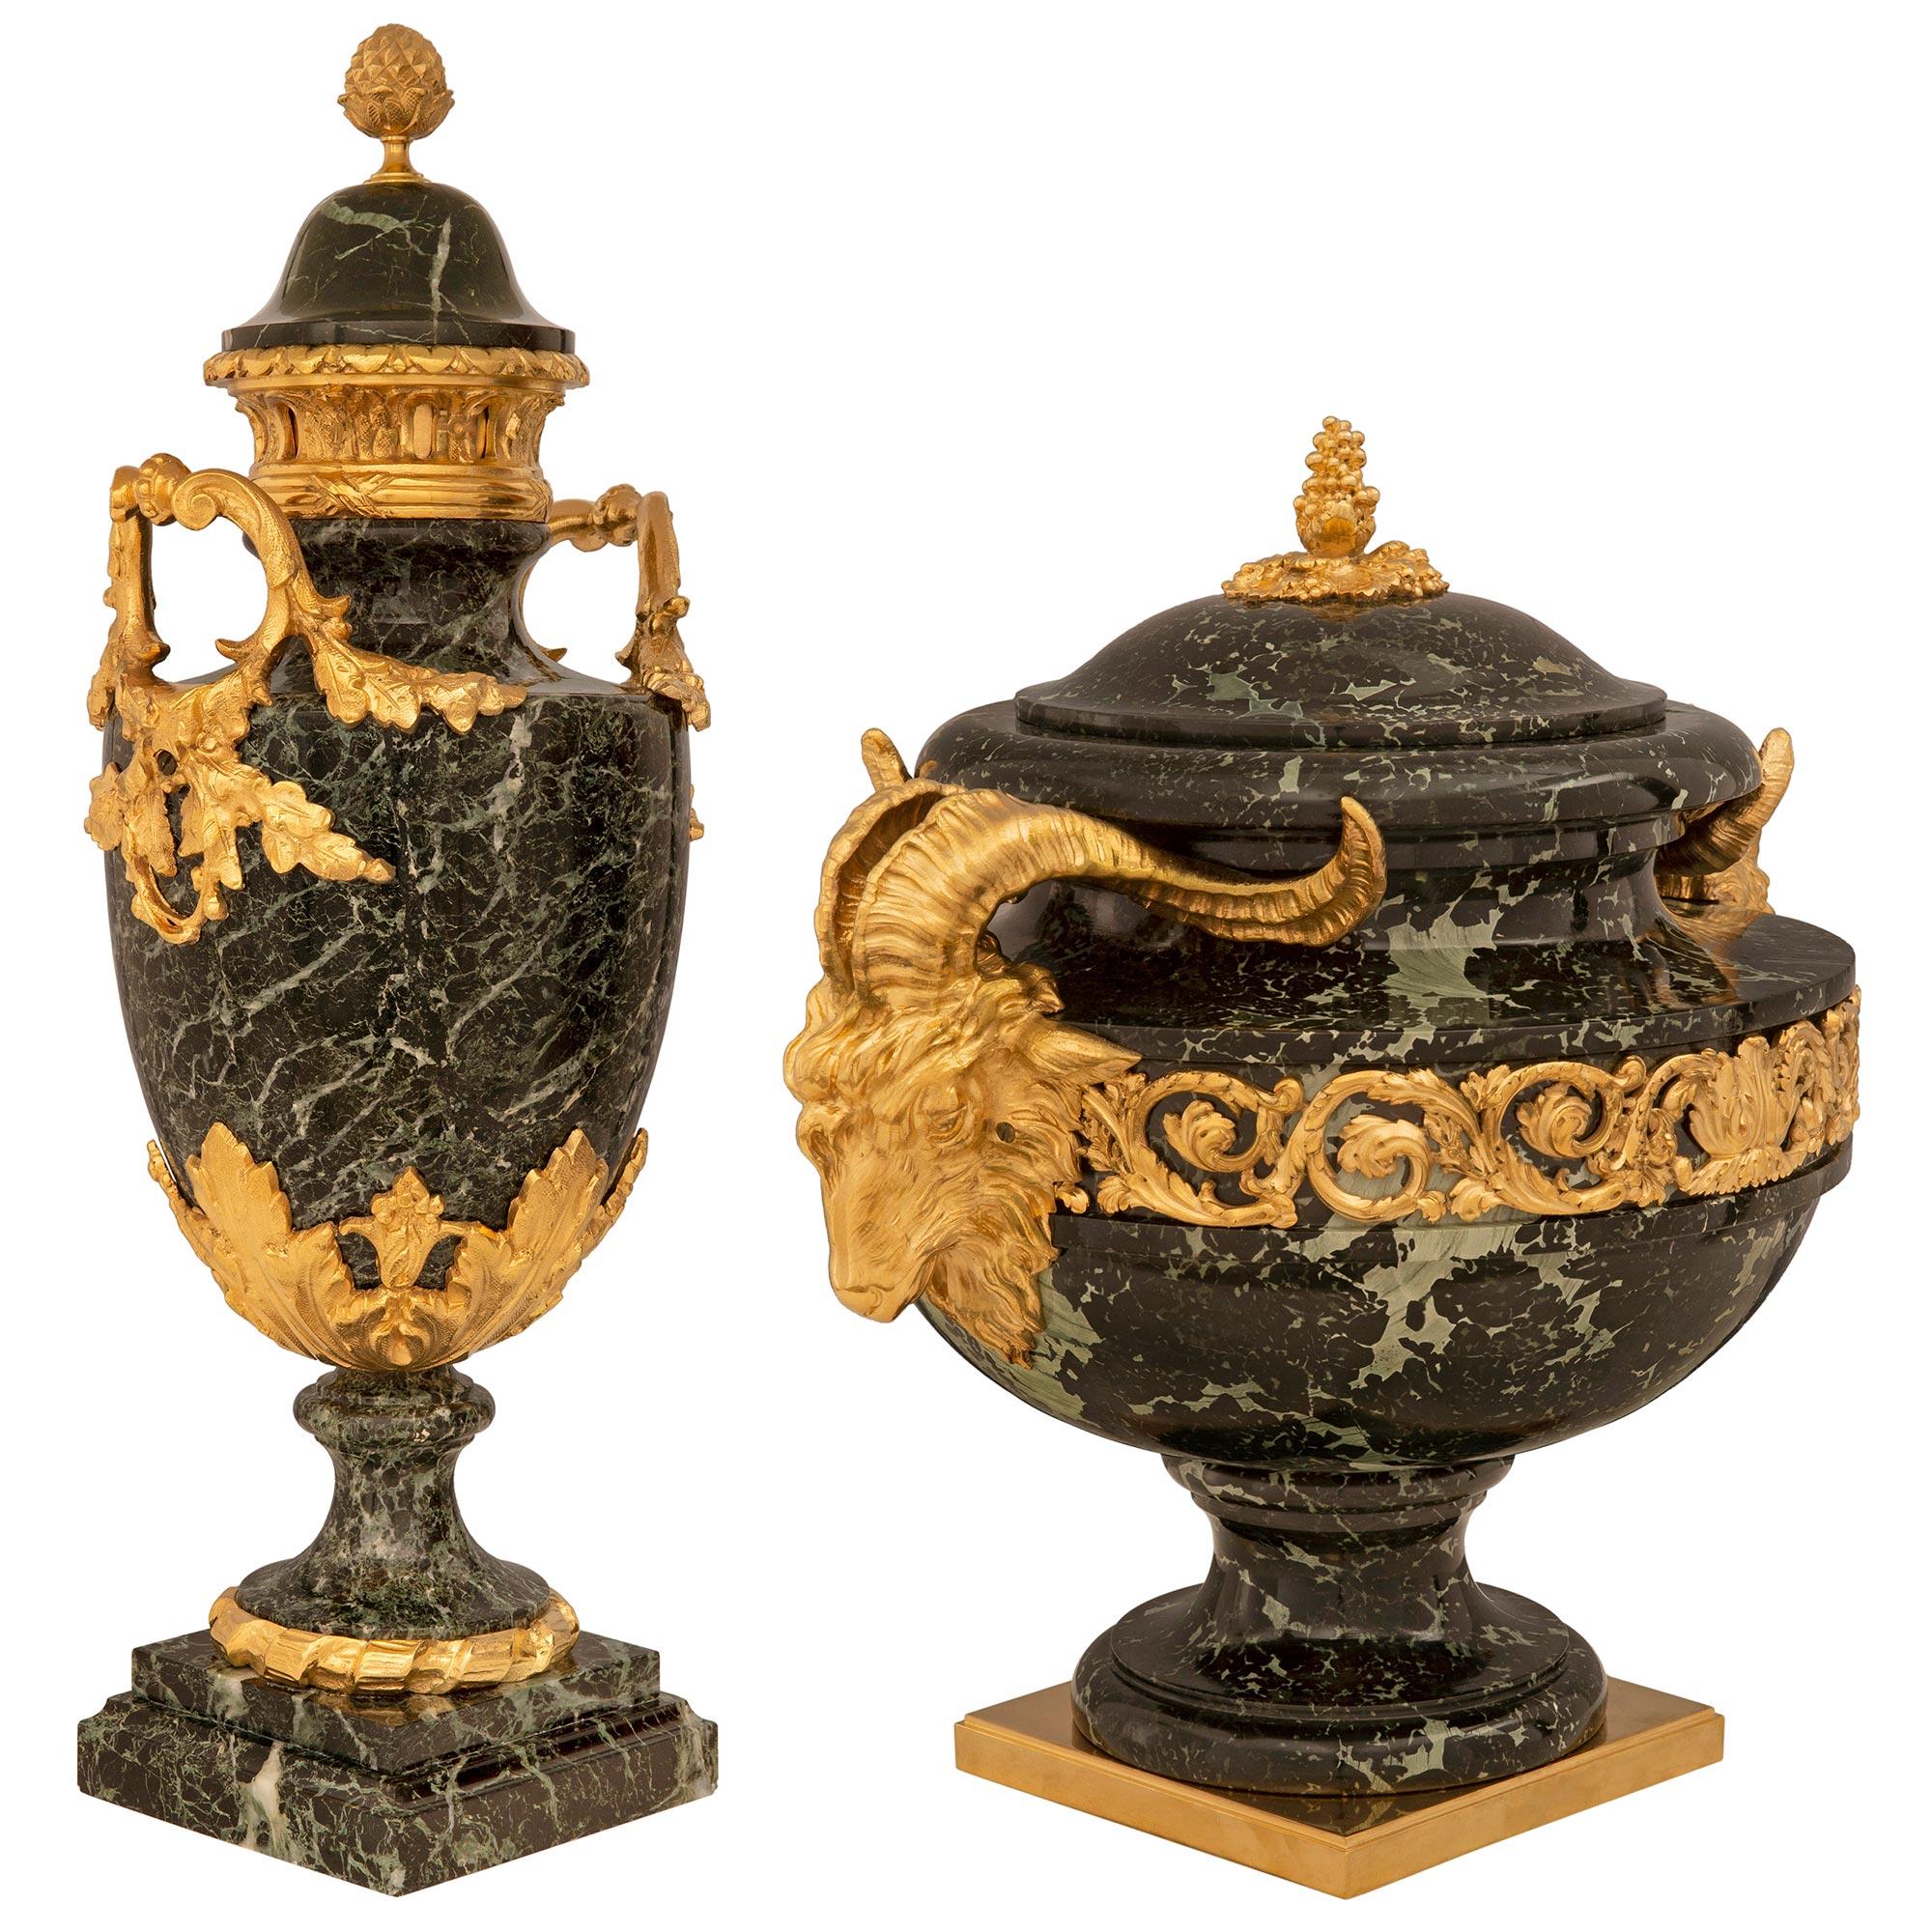 An impressive and extremely decorative French 19th century Louis XVI st. Vert de Patricia marble and Ormolu three piece garniture set. The pair of outer vases are raised by a mottled square base with an Ormolu twisted ribbon band. Above is the urn